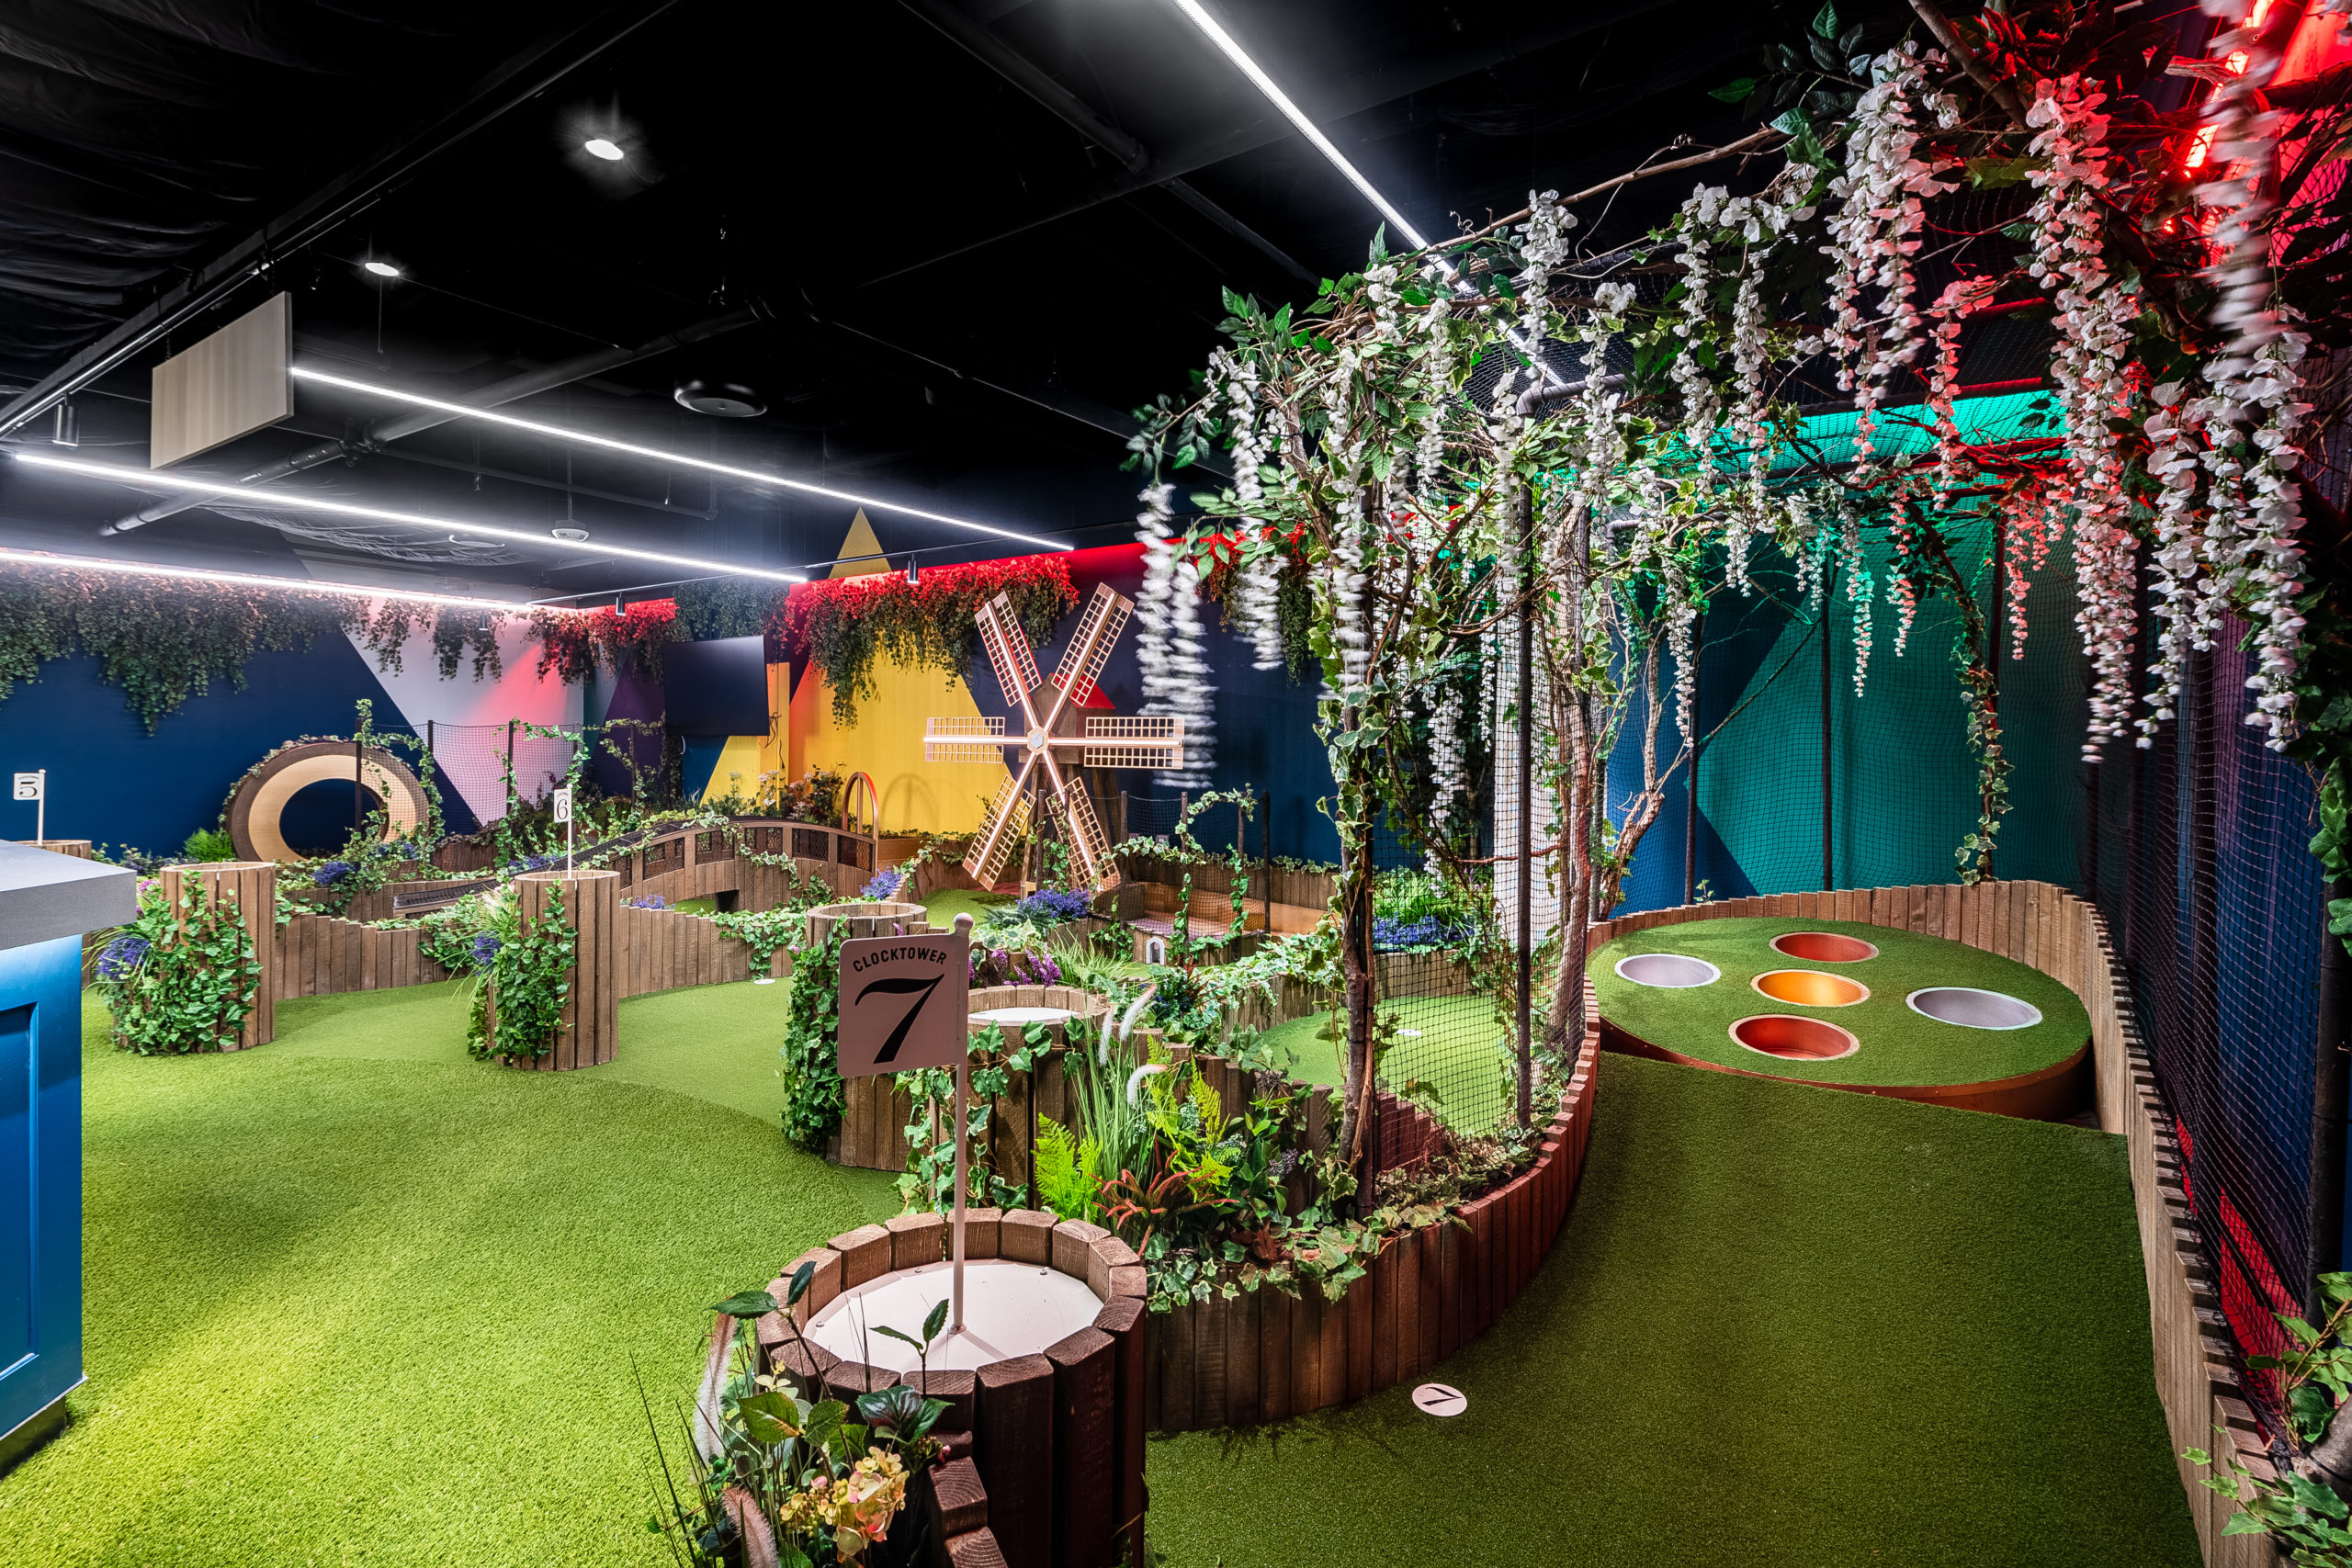 Swingers Brings Crazy Golf to